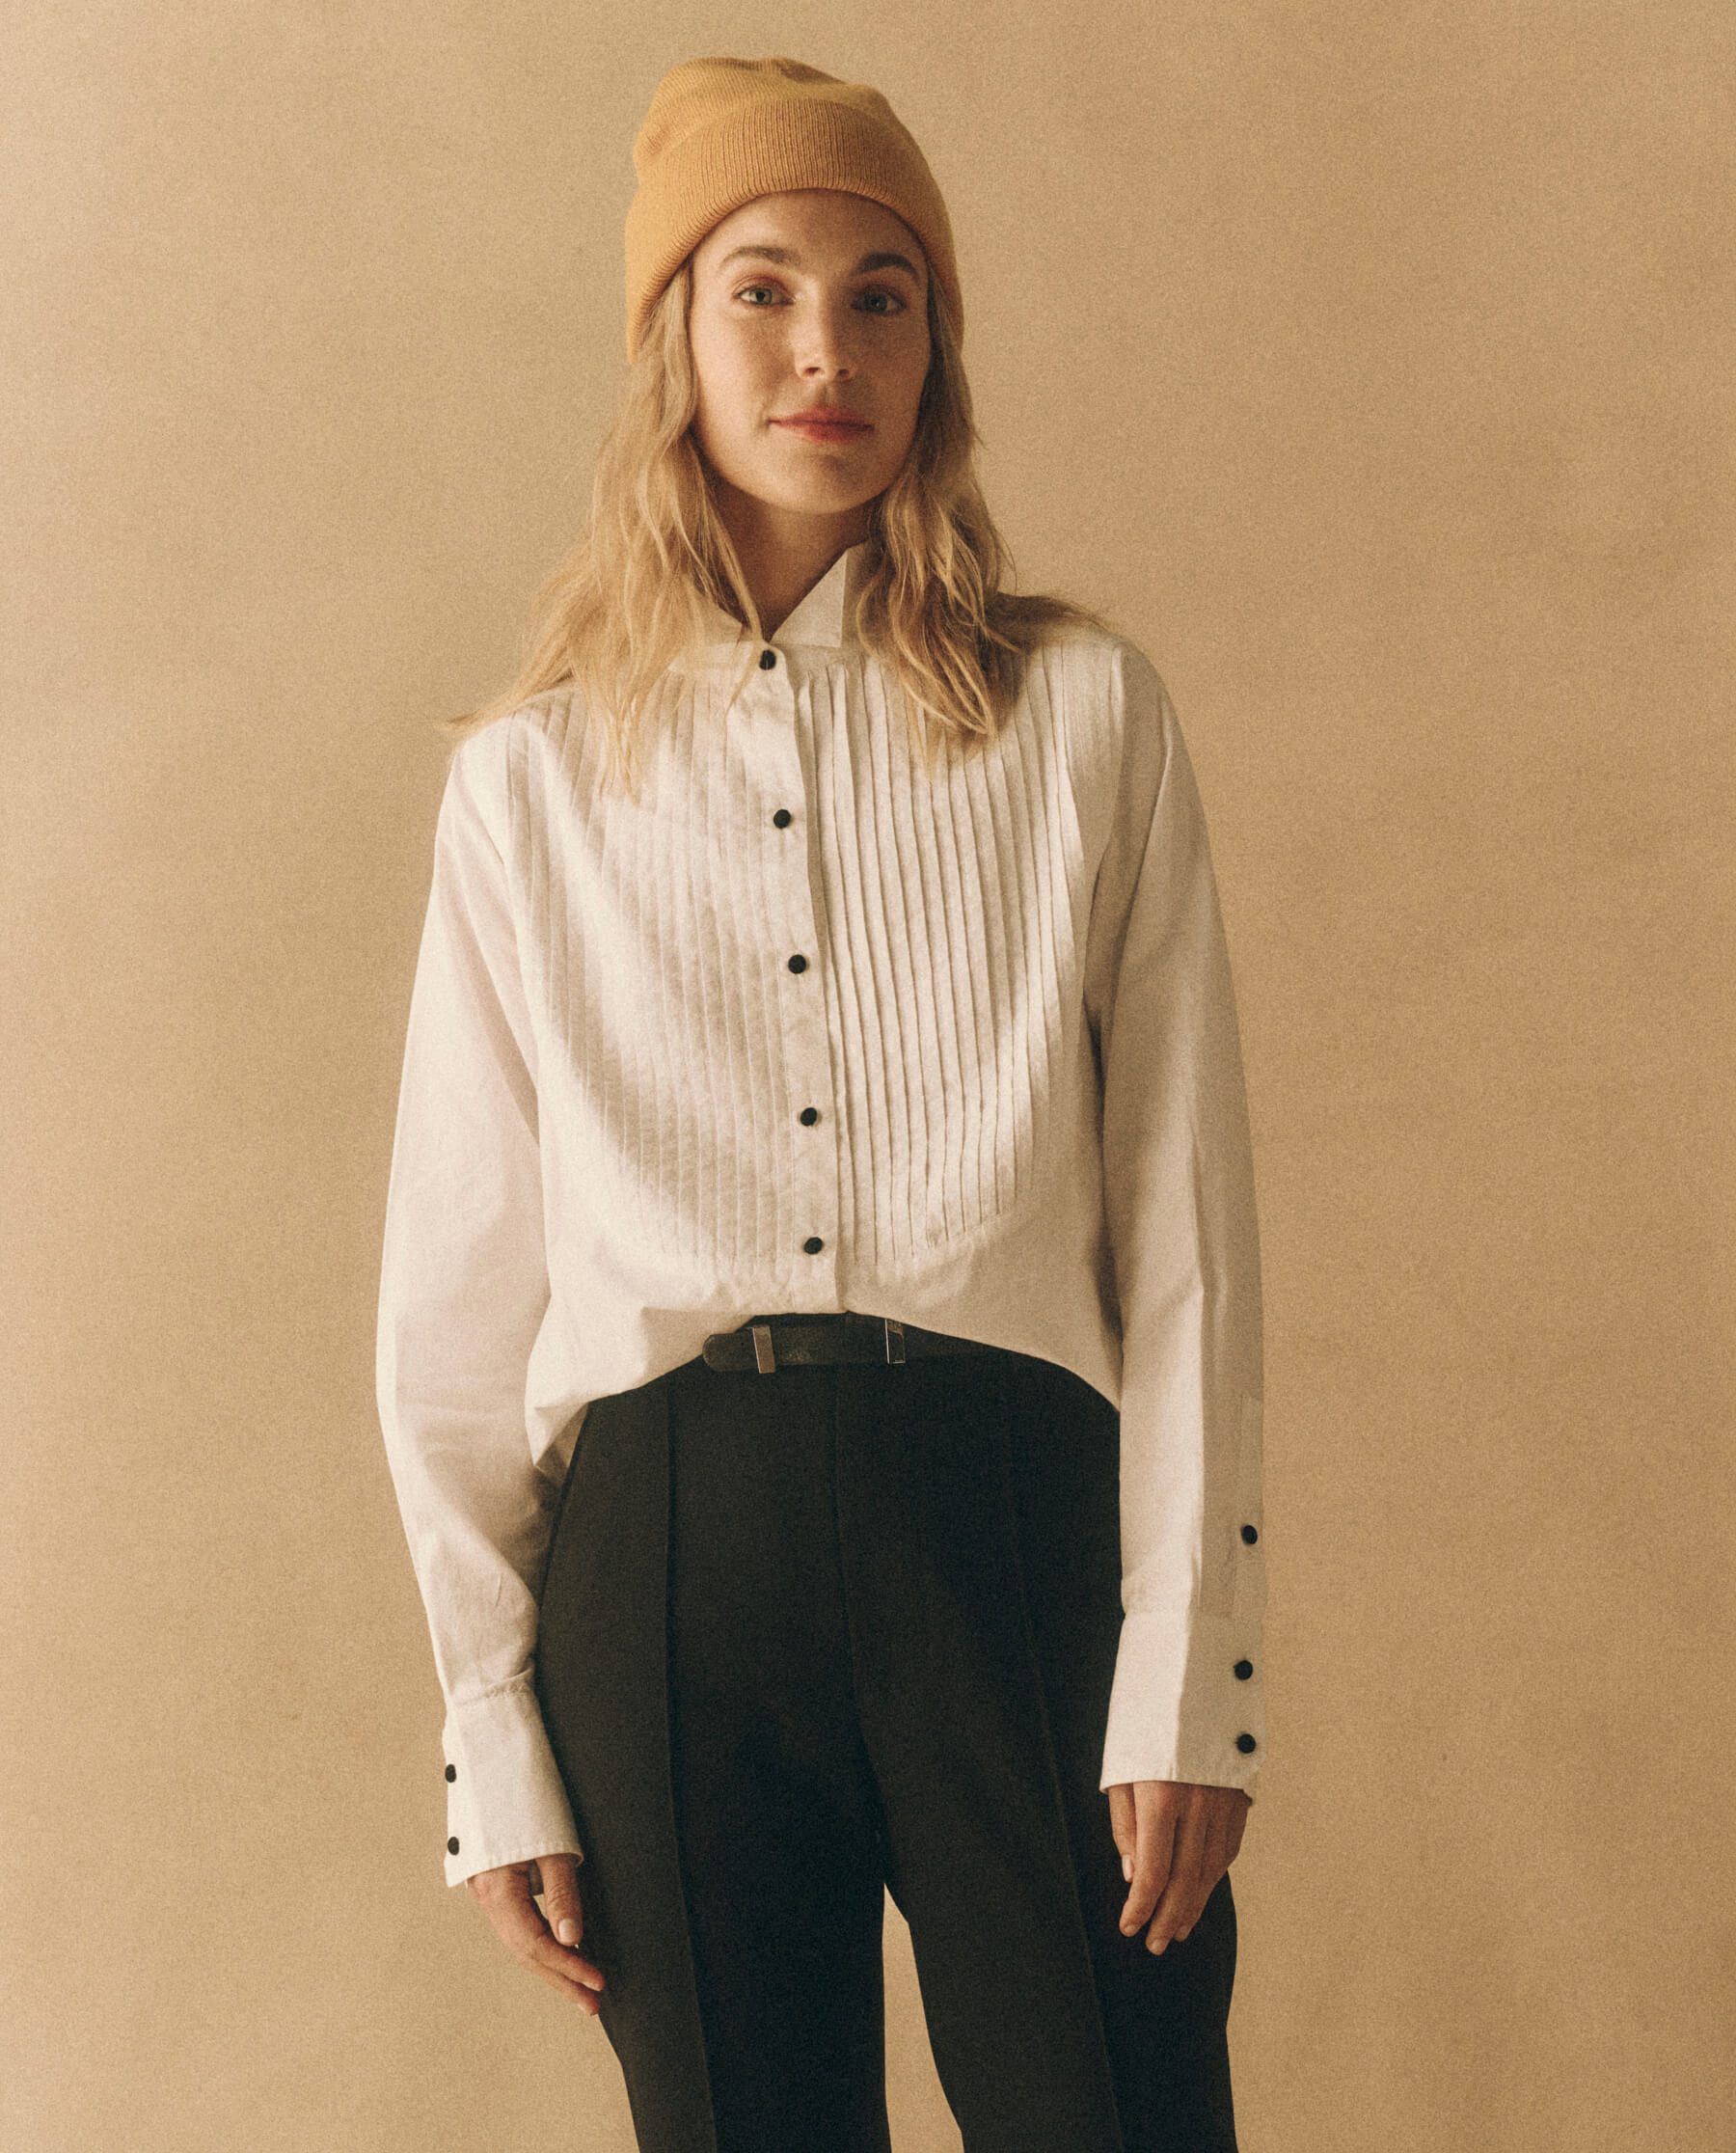 White Pleated Tuxedo Shirt - The Ben Silver Collection